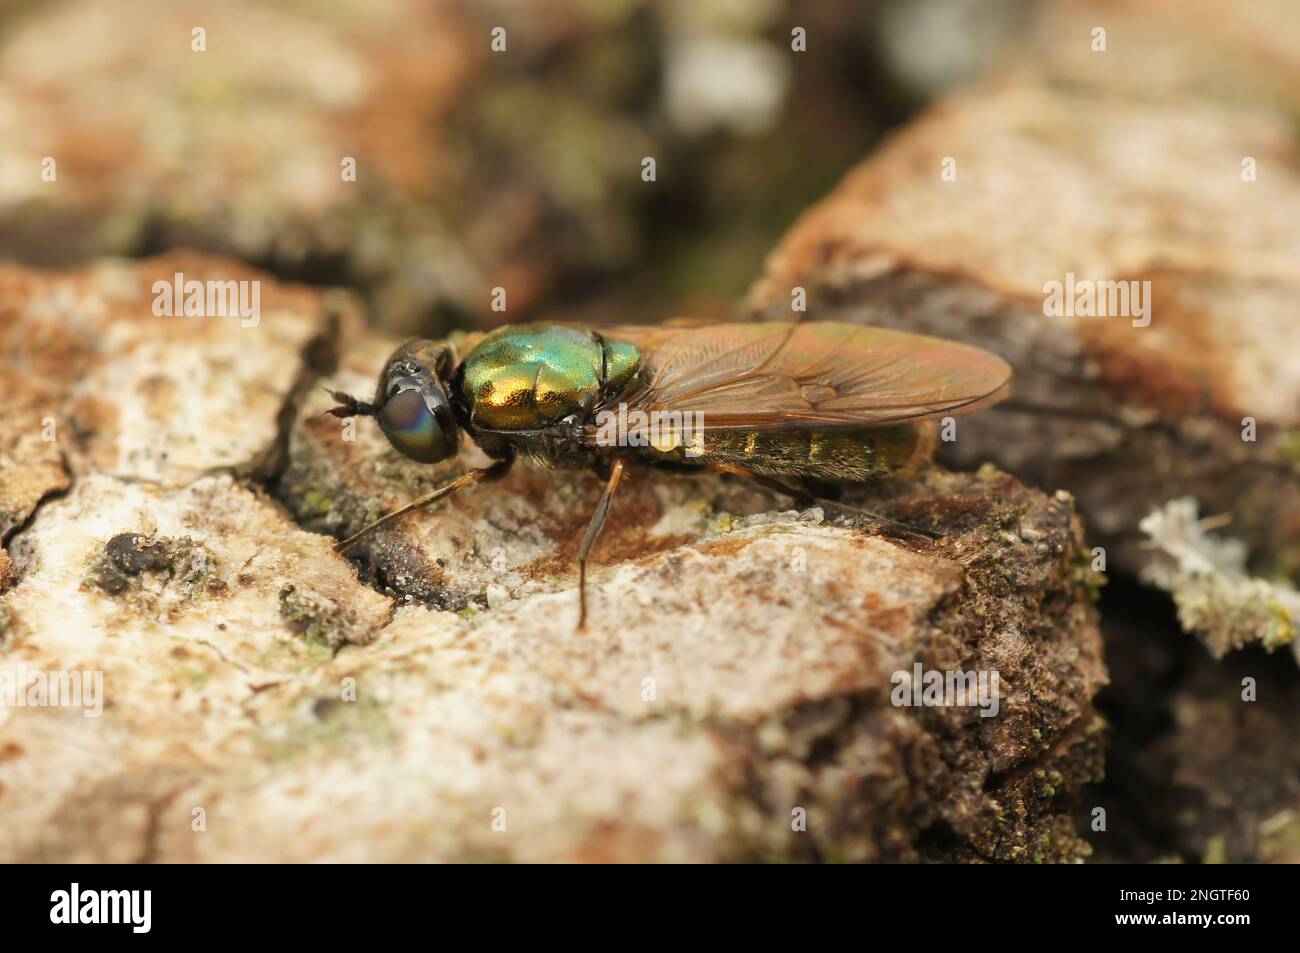 Natural closeup on a green Broad Centurion soldier fly, Chloromyia formosa, sitting on wood in the garden Stock Photo